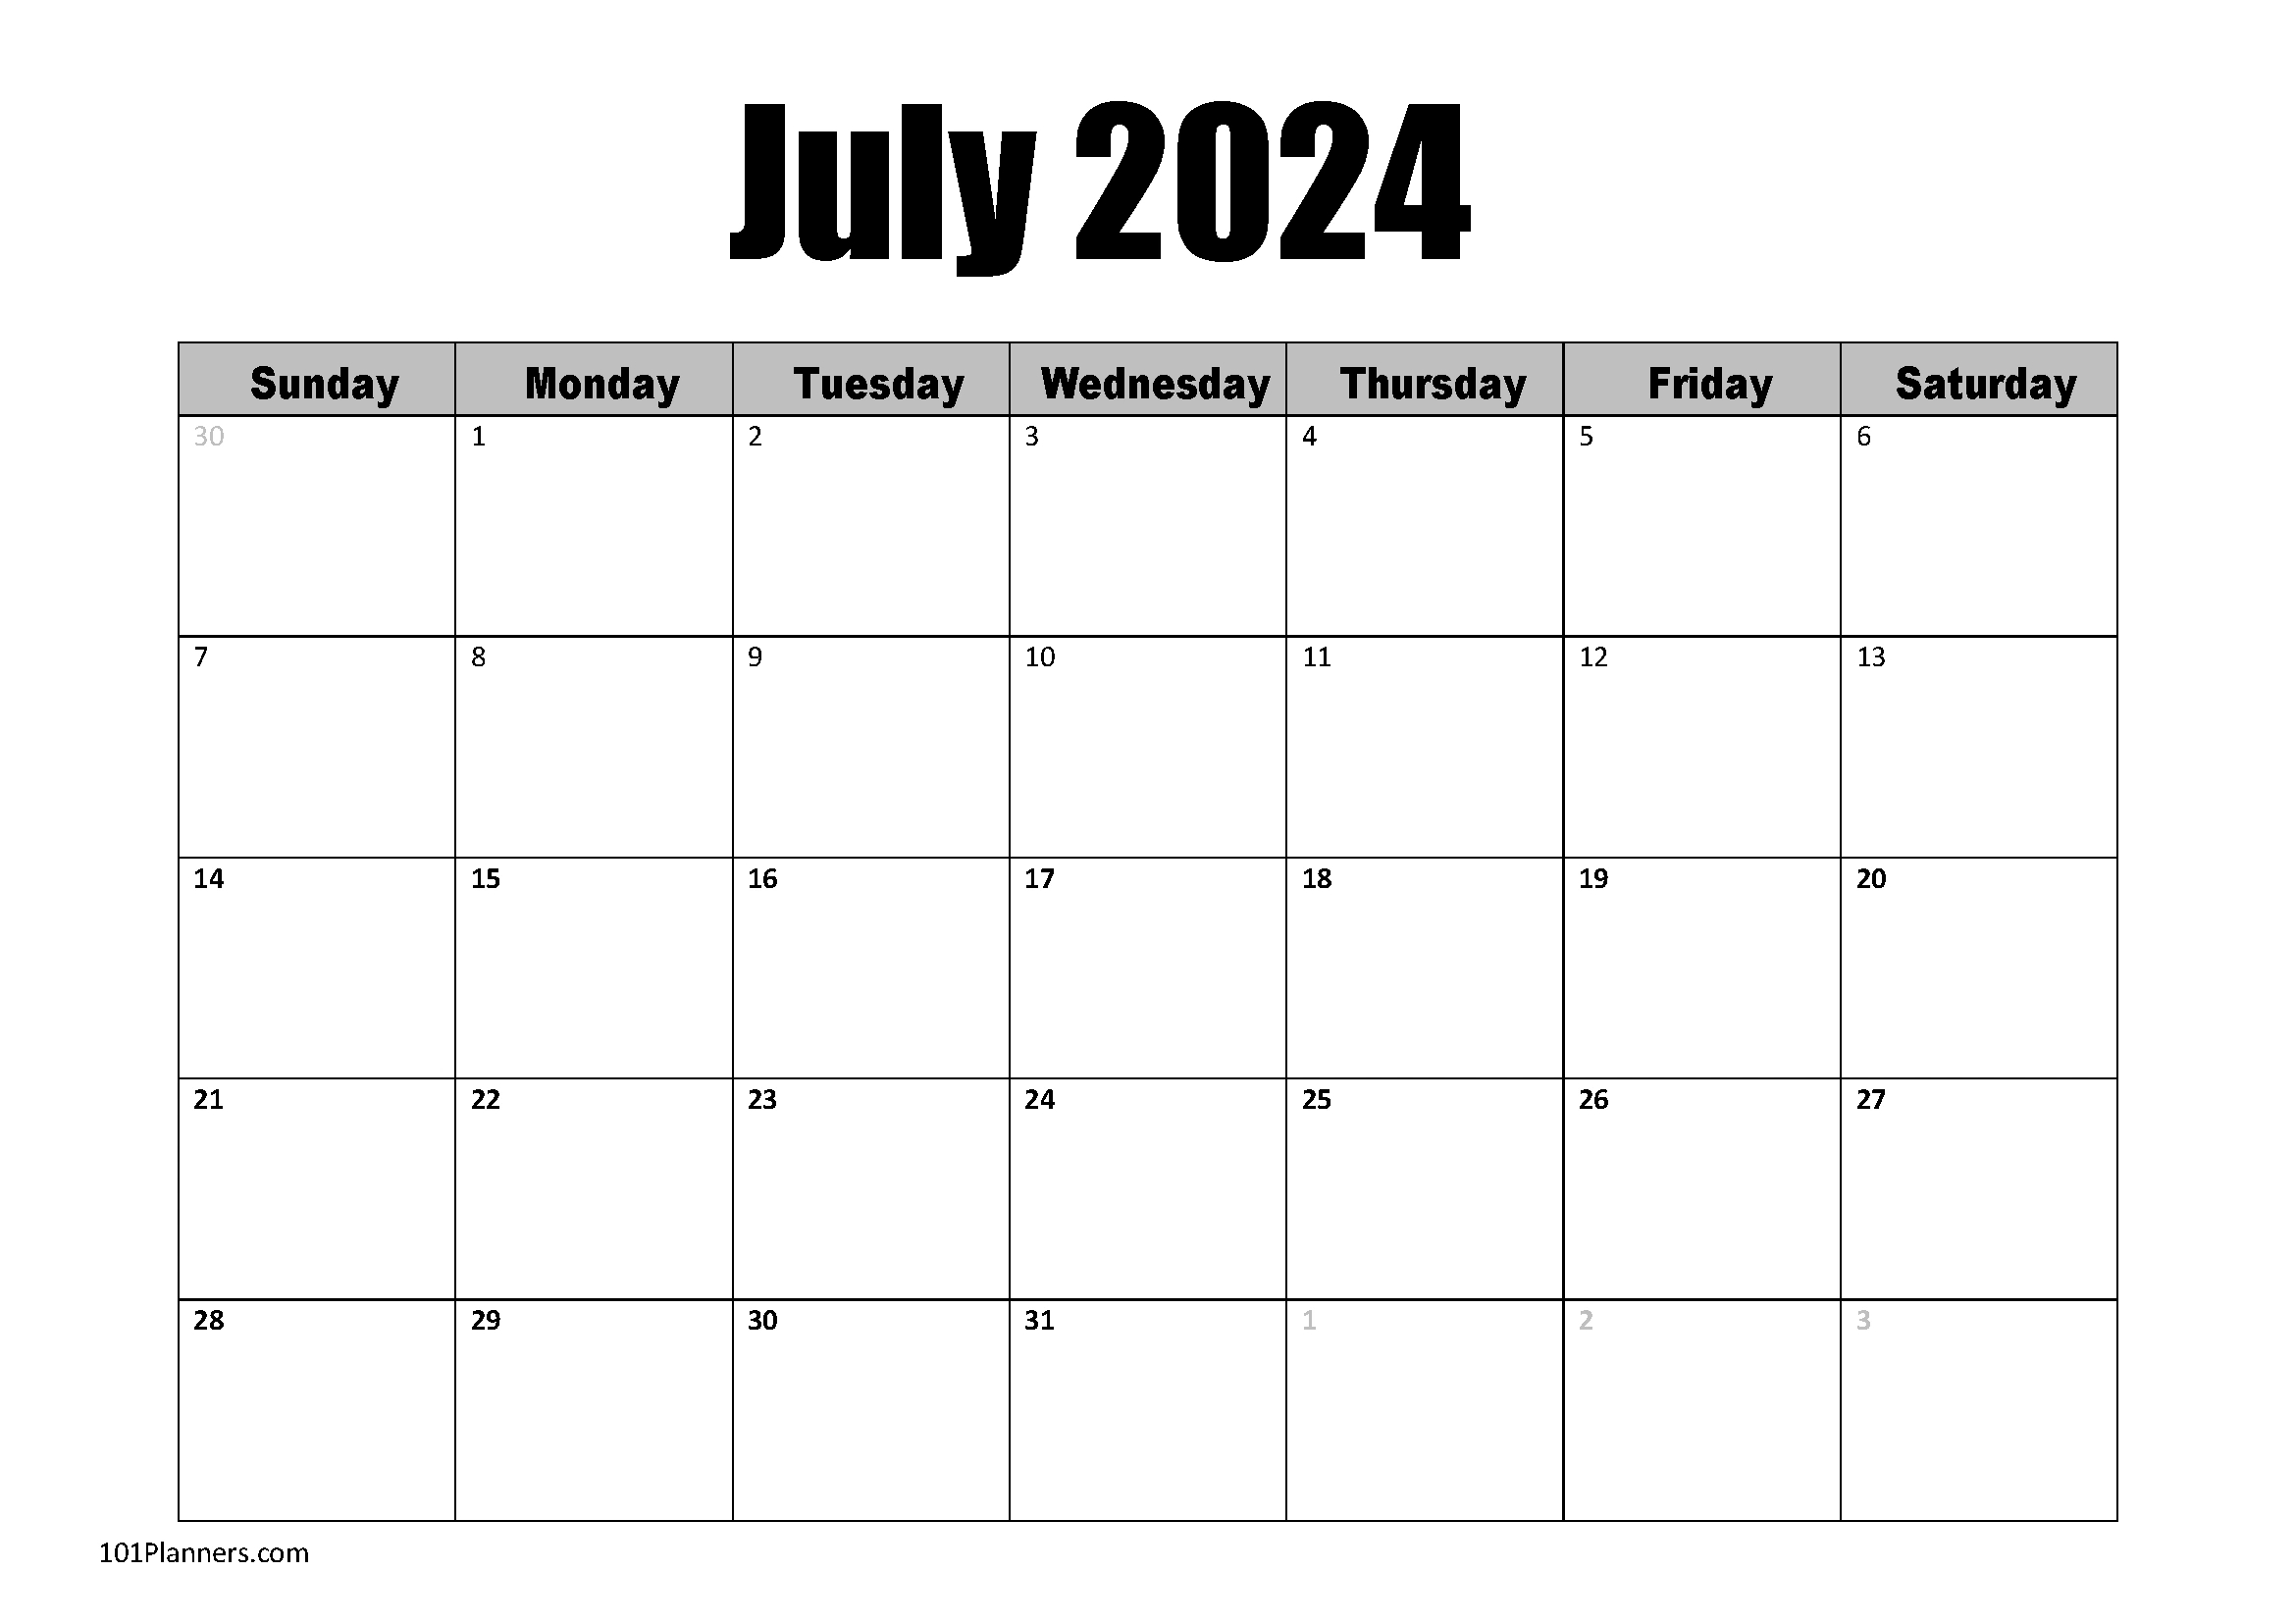 Free Printable July 2024 Calendar | Customize Online within July 2024 Calendar Small